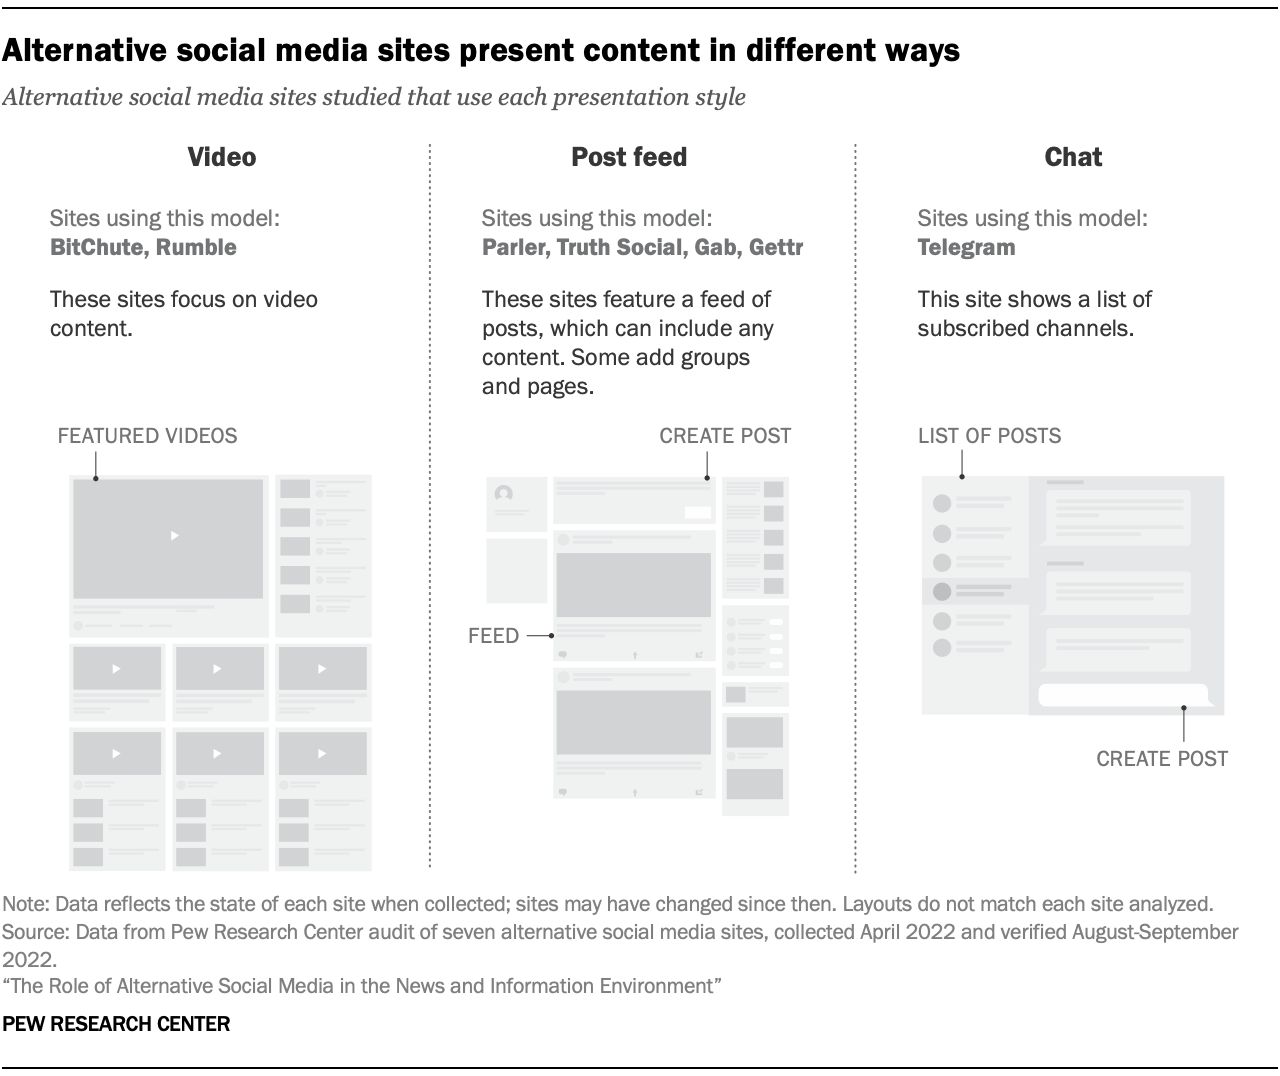 A graphic showing how Alternative social media sites present content in different ways